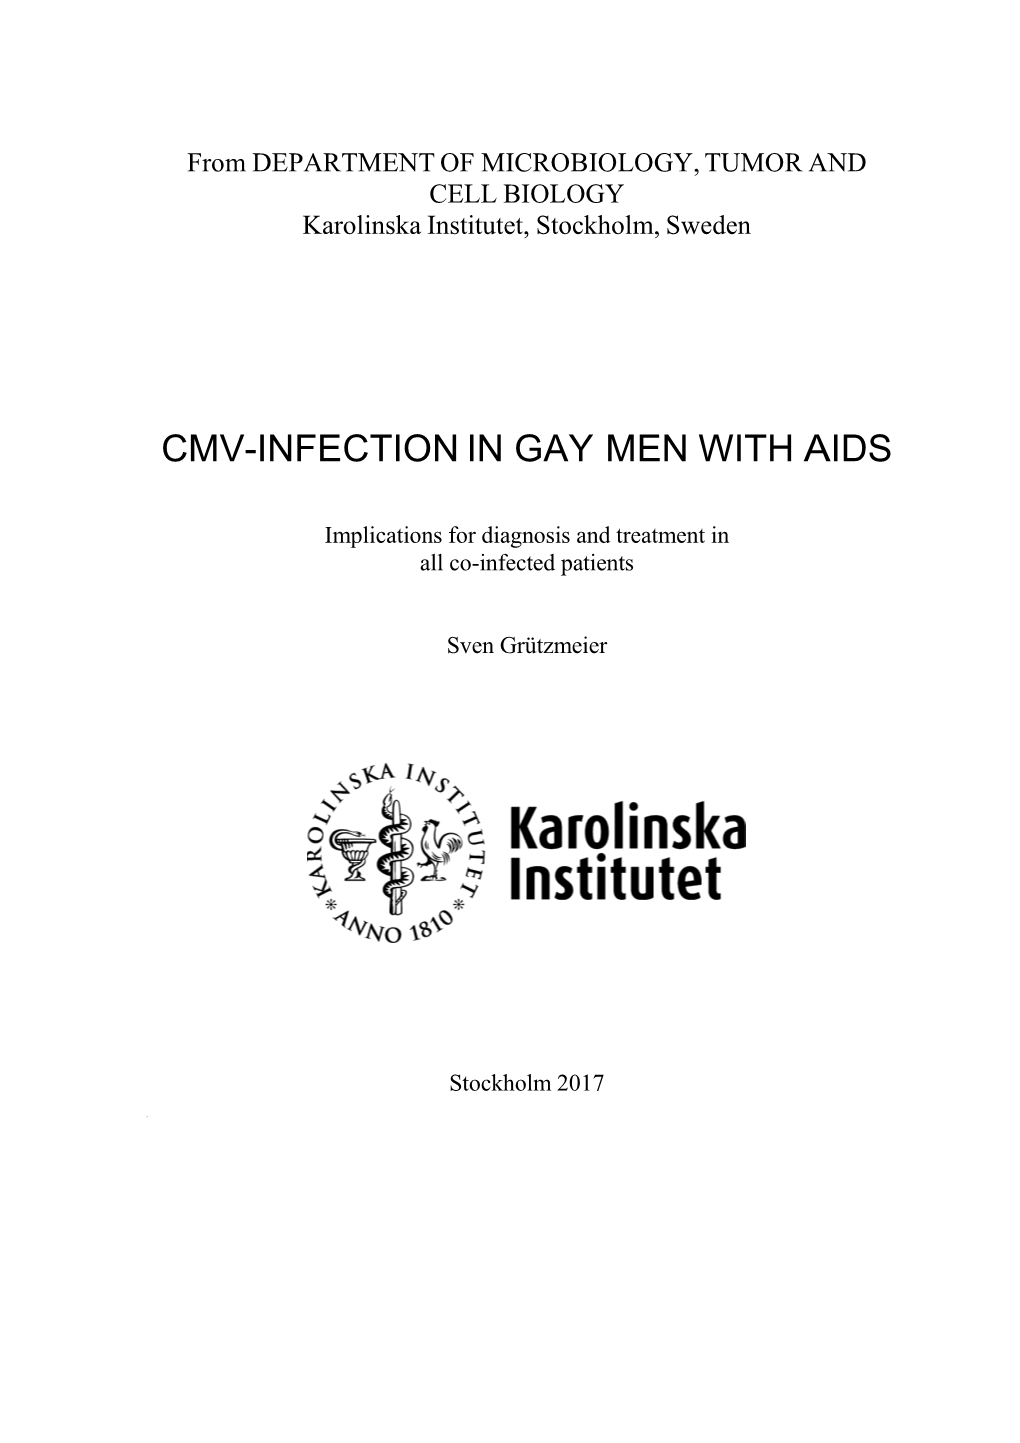 Cmv-Infection in Gay Men with Aids